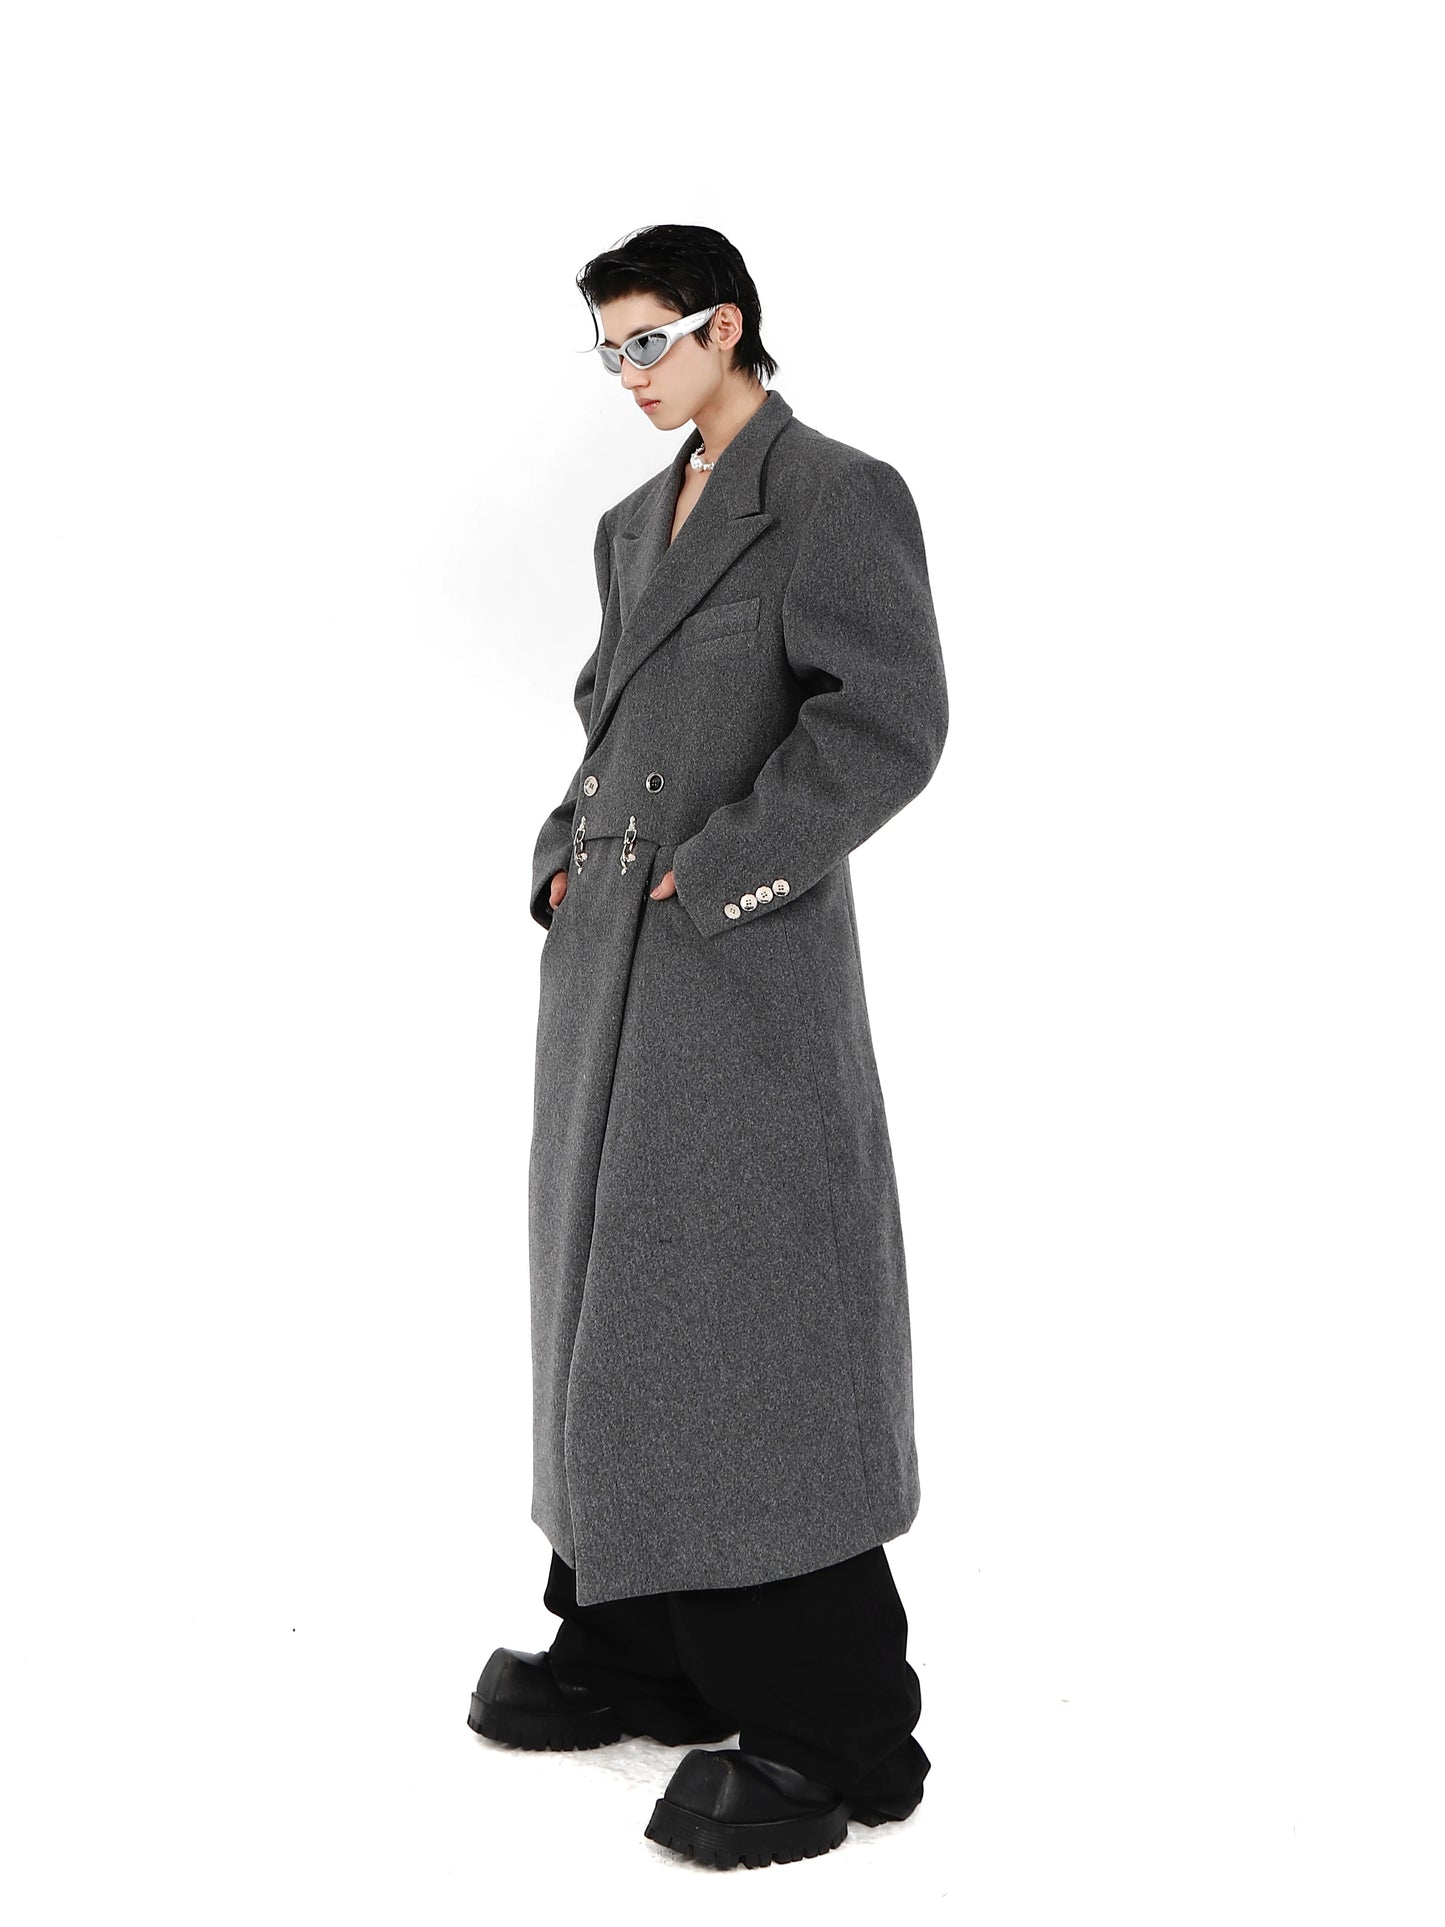 CulturE is a niche deconstructed sculptural silhouette with padded shoulders and a tweed coat with a metal airplane buckle design